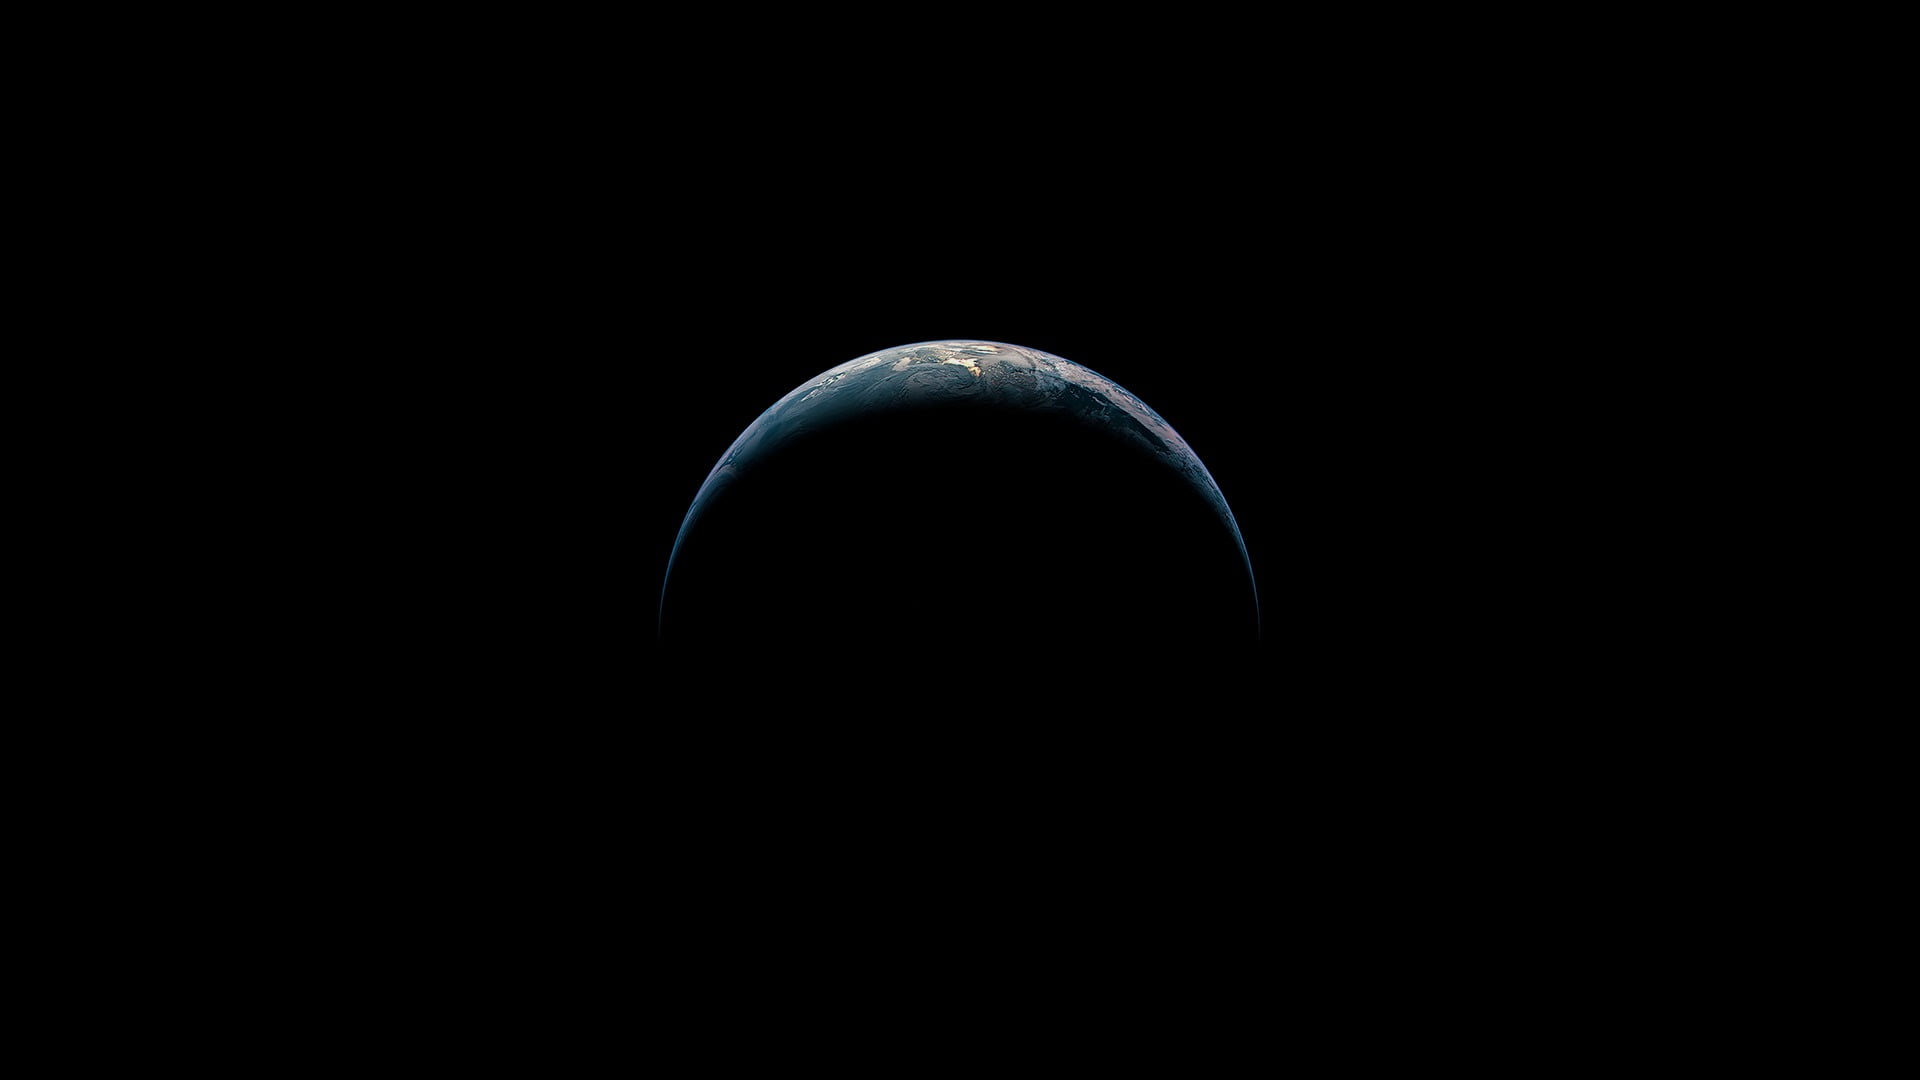 planet wallpaper, Apple, iPhone, Space, iOS 8, planet - Space